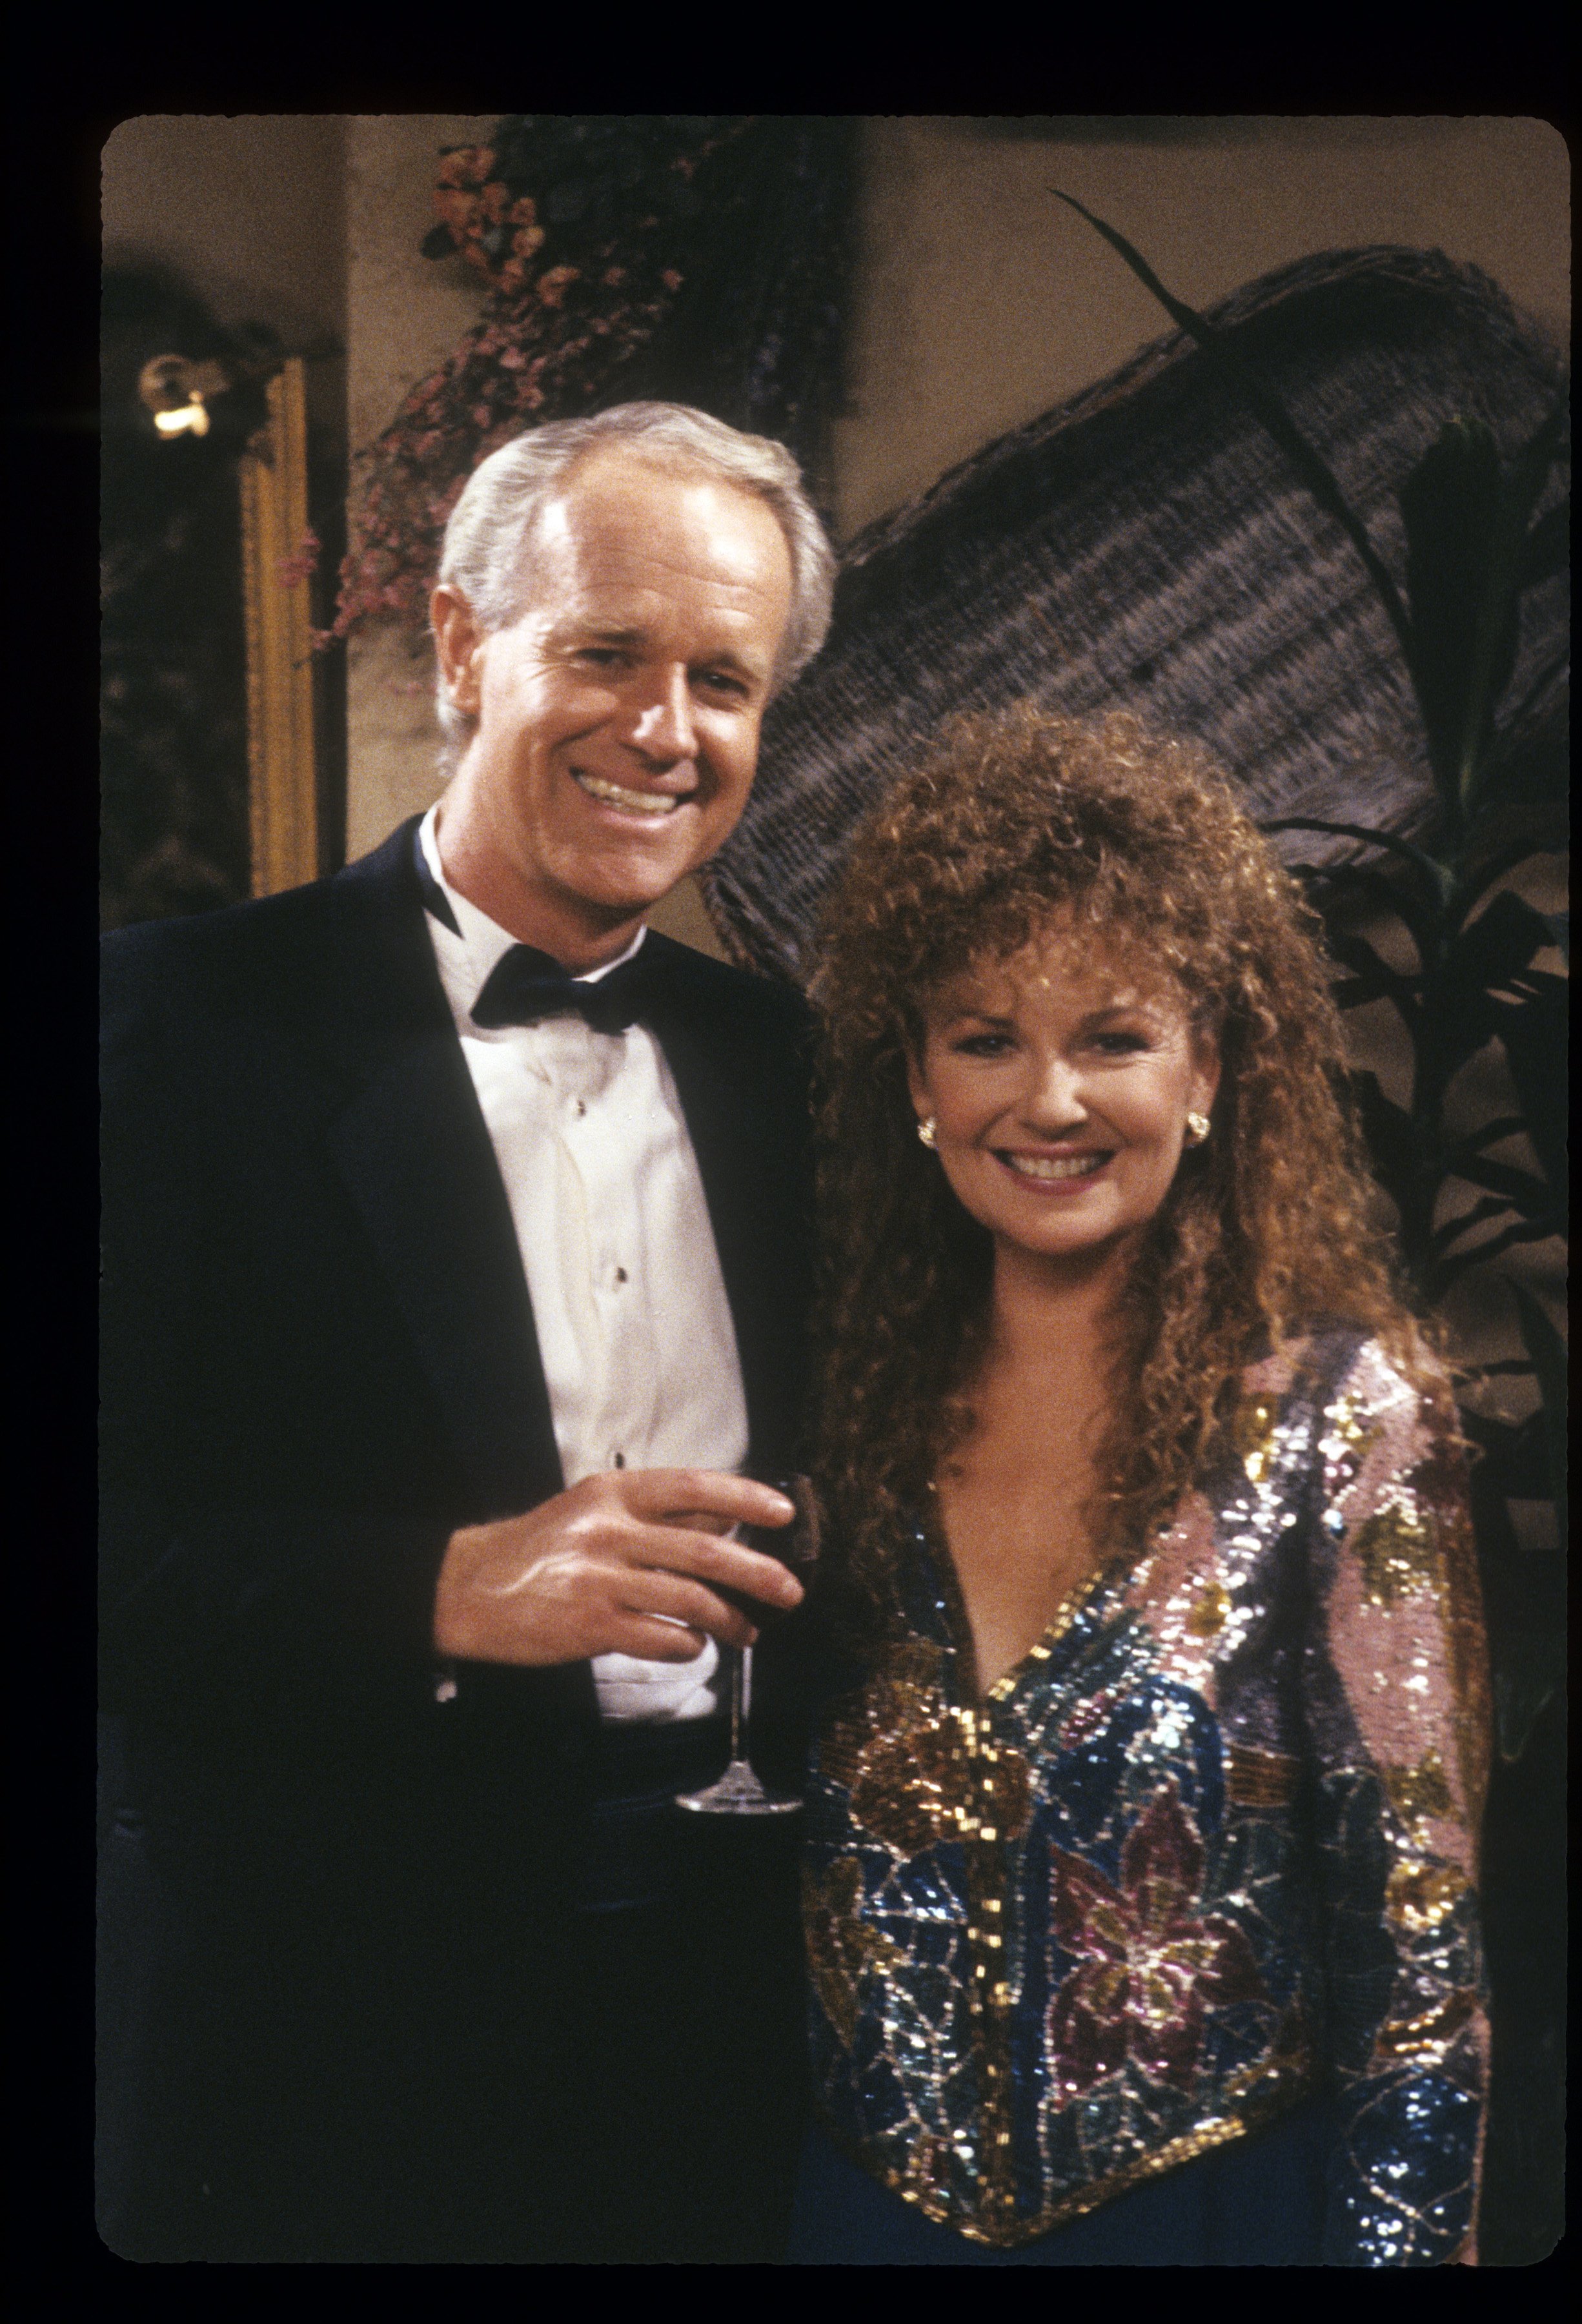 Shelley Fabares and Mike Farrell on the TV sitcom "Coach" in an episode titled "A Jerk At the Opera" aired on April 17, 1990. / Source: Getty Images